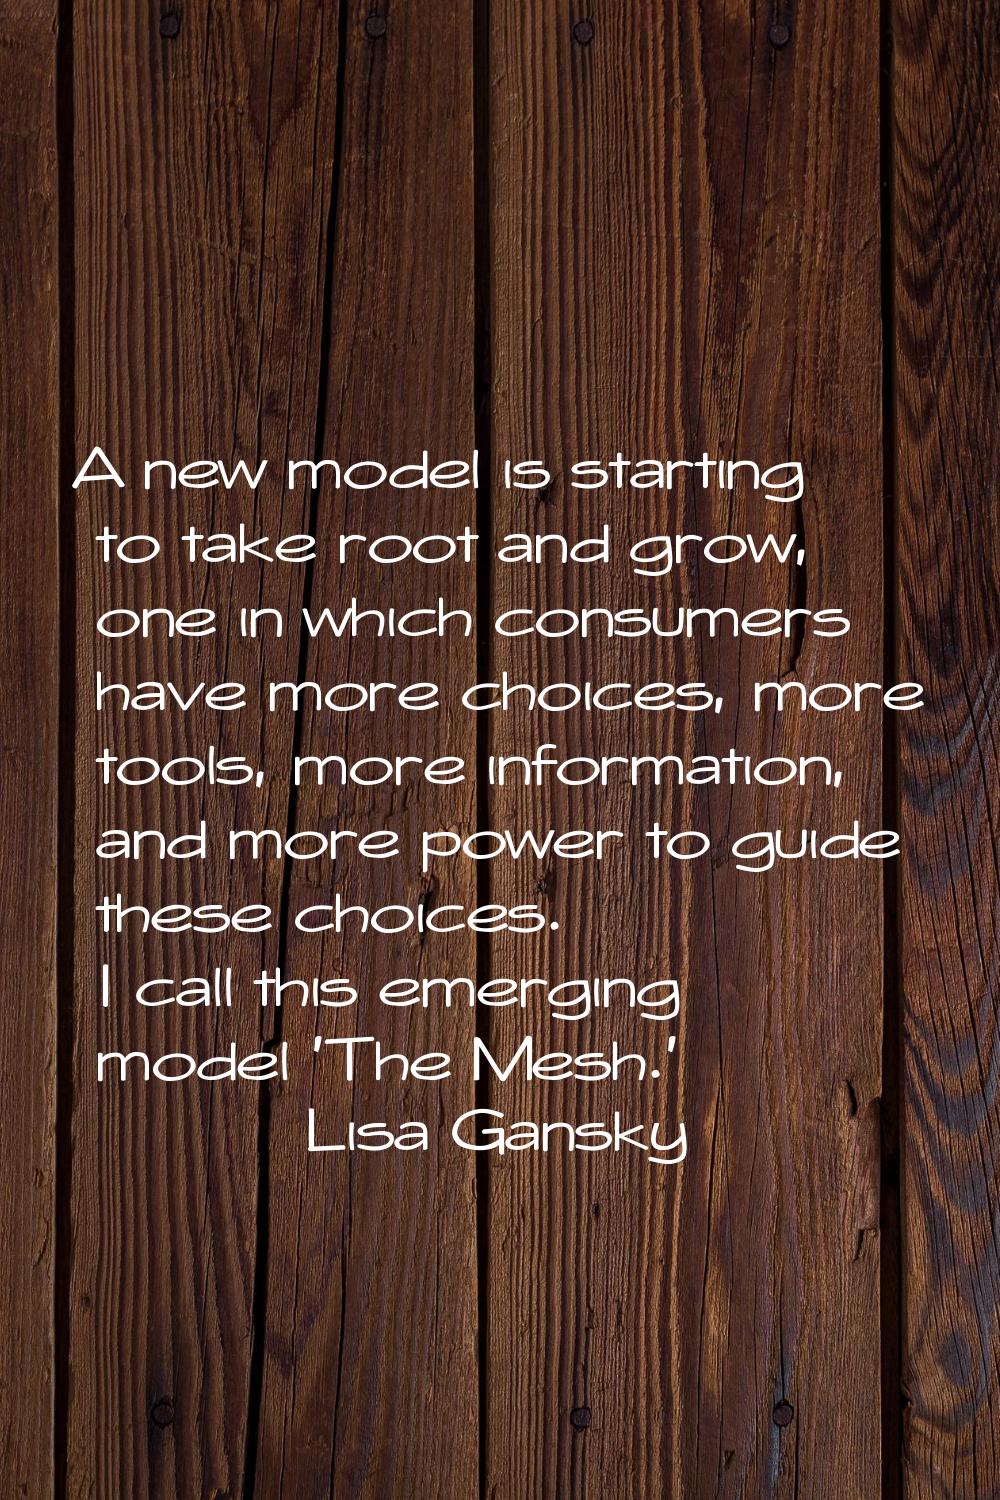 A new model is starting to take root and grow, one in which consumers have more choices, more tools